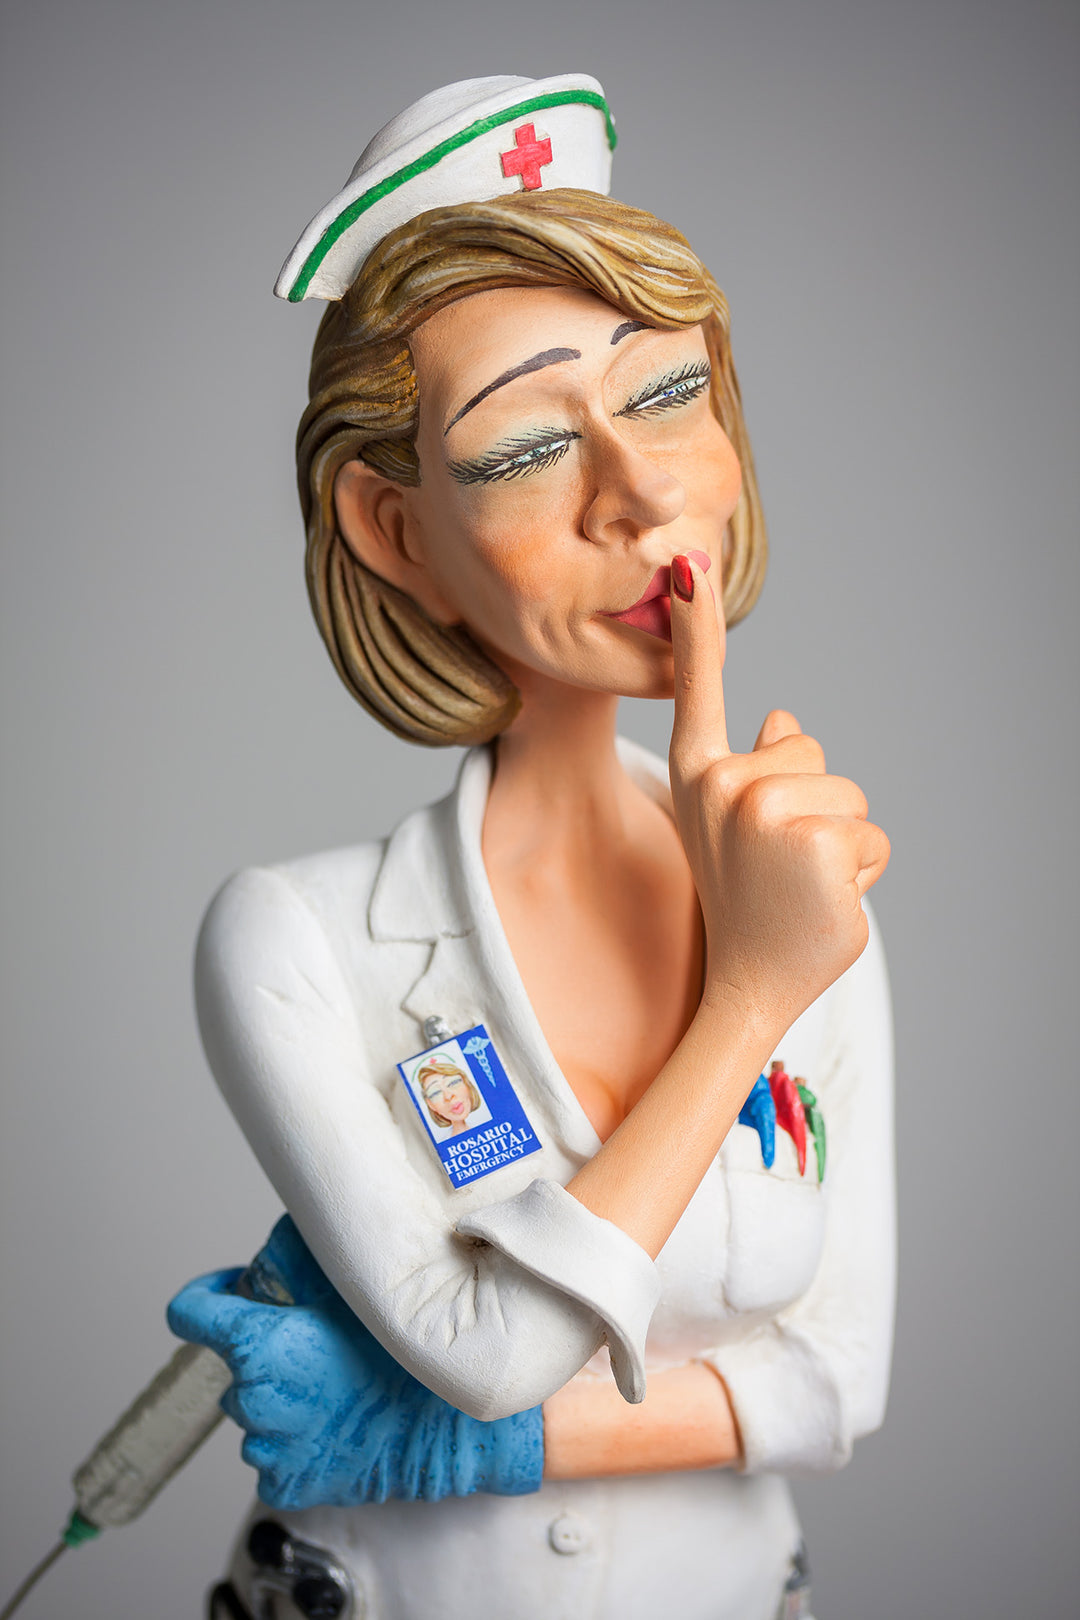 Guillermo Forchino - Comic Art Figurine - "The Nurse" - Buchan's Kerrisdale Stationery